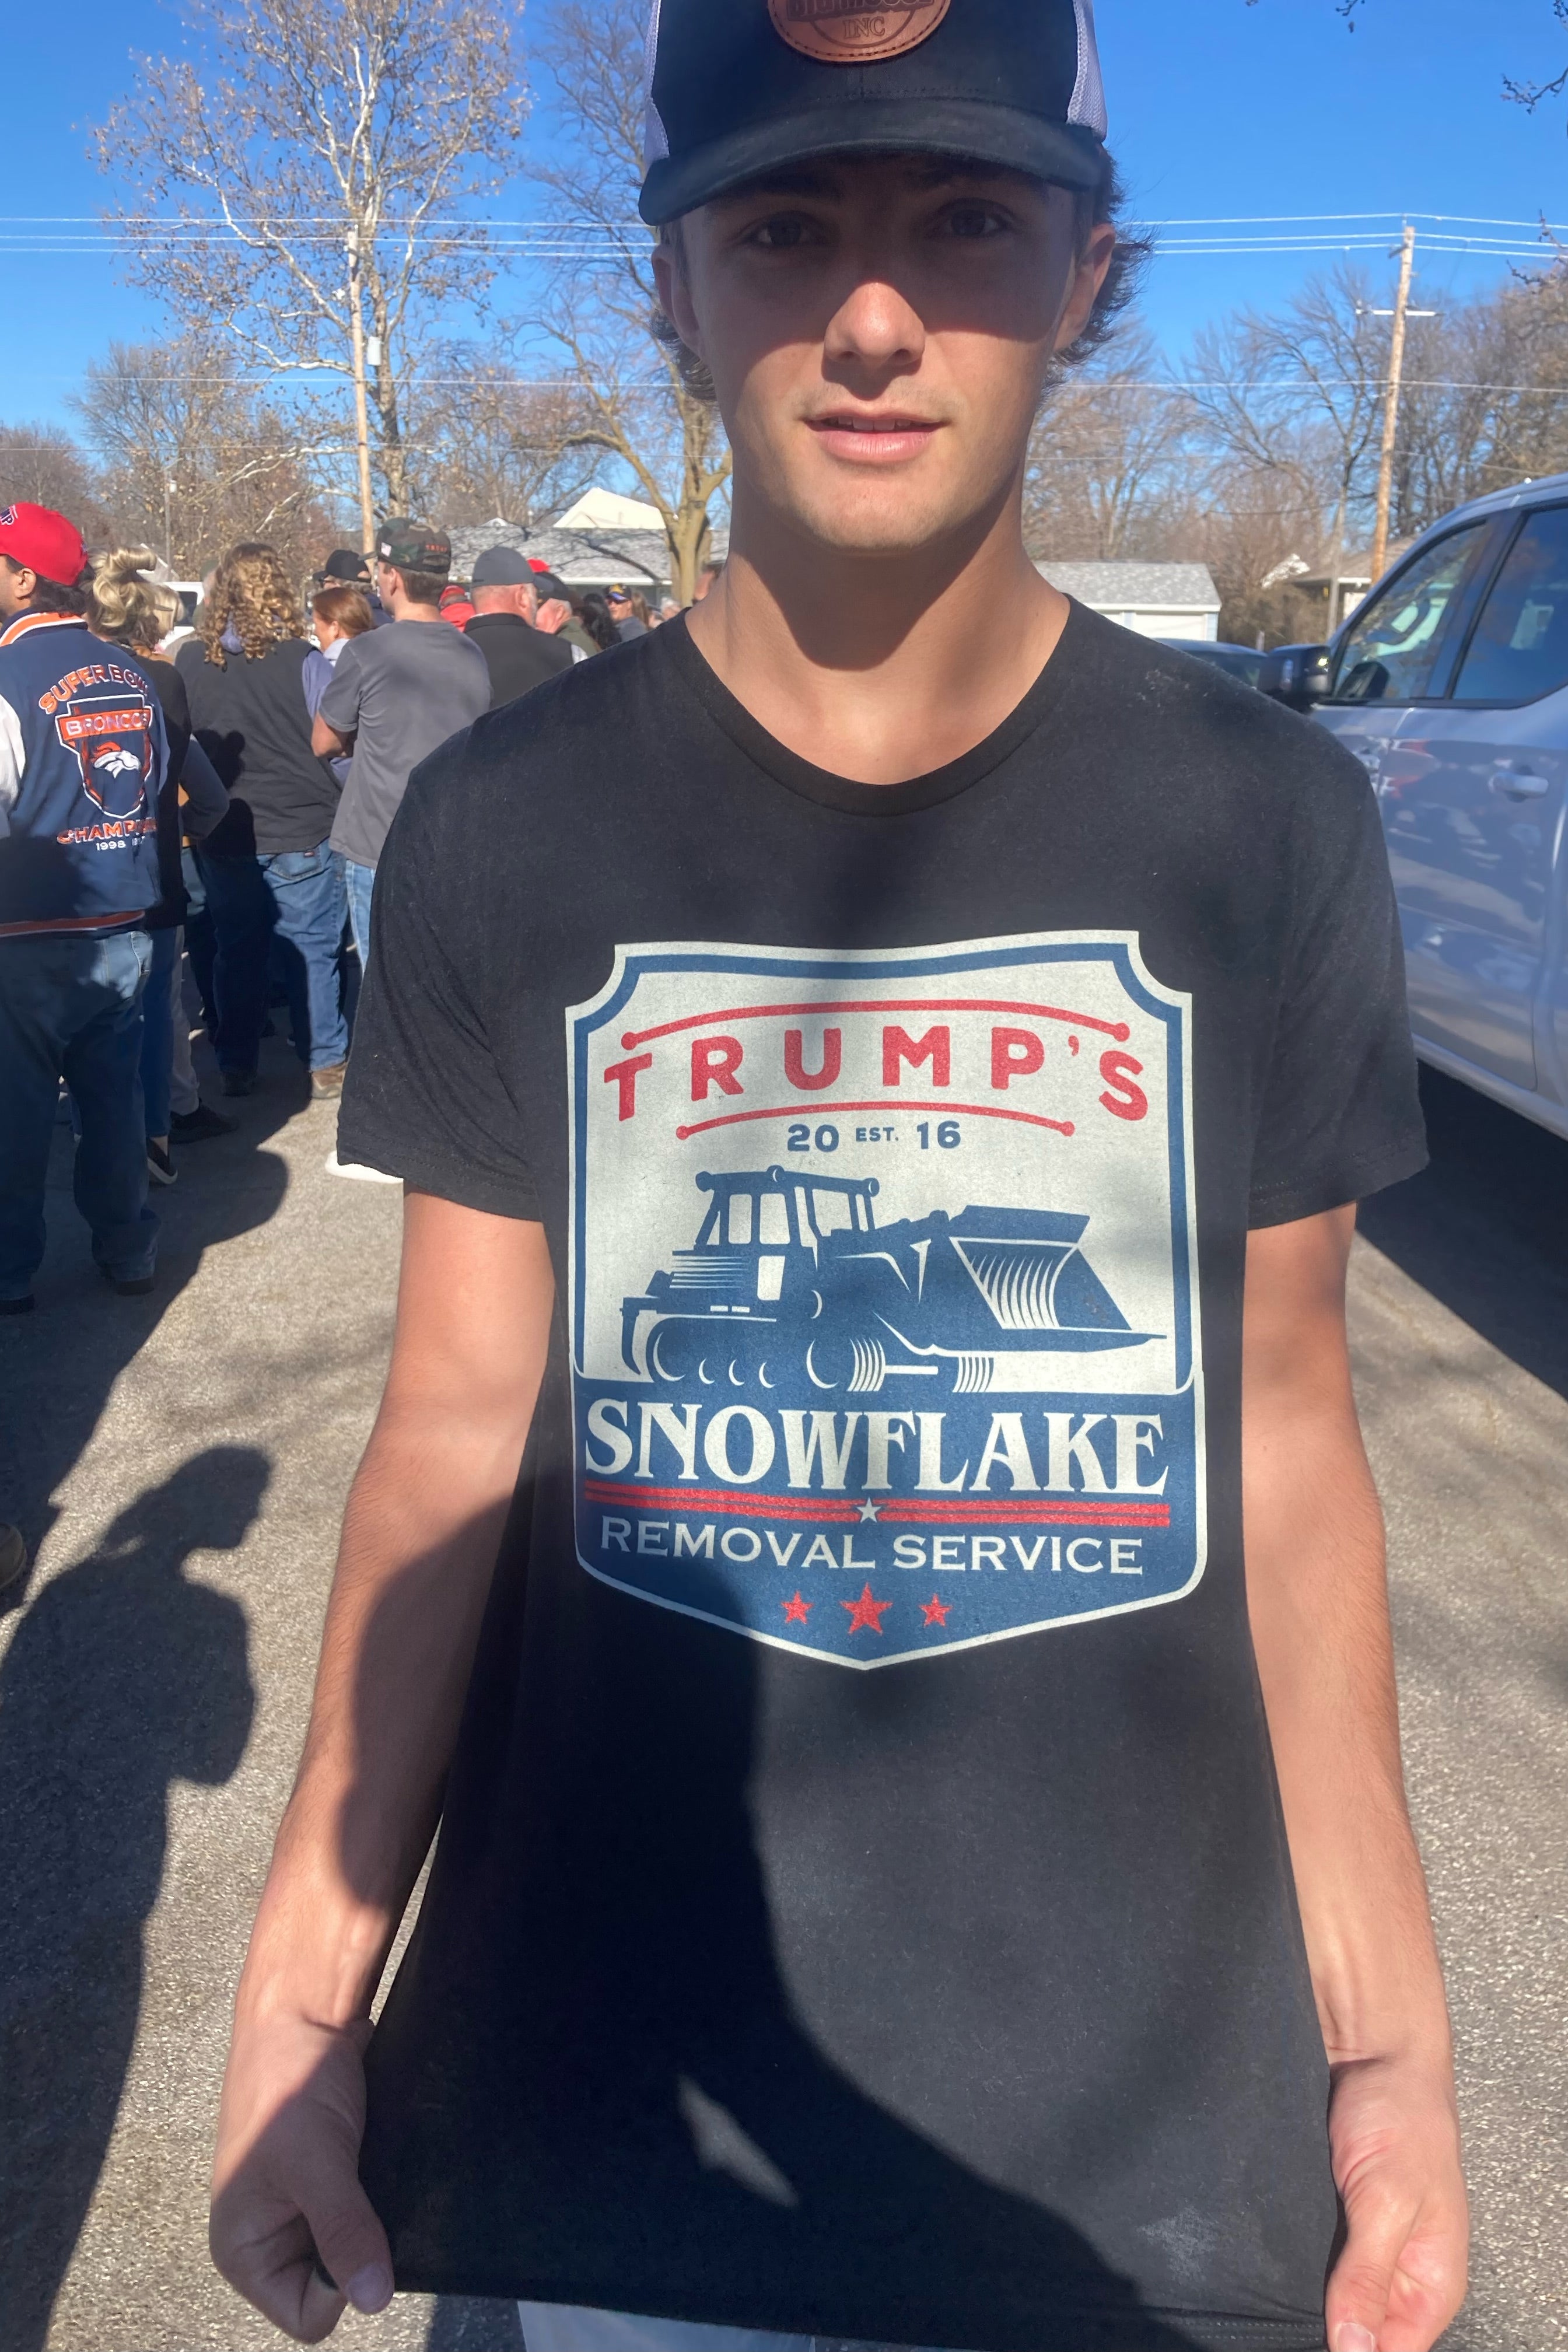 A young man wearing a shirt that says "Trump's Snowflake Removal Service, Est. 2016."